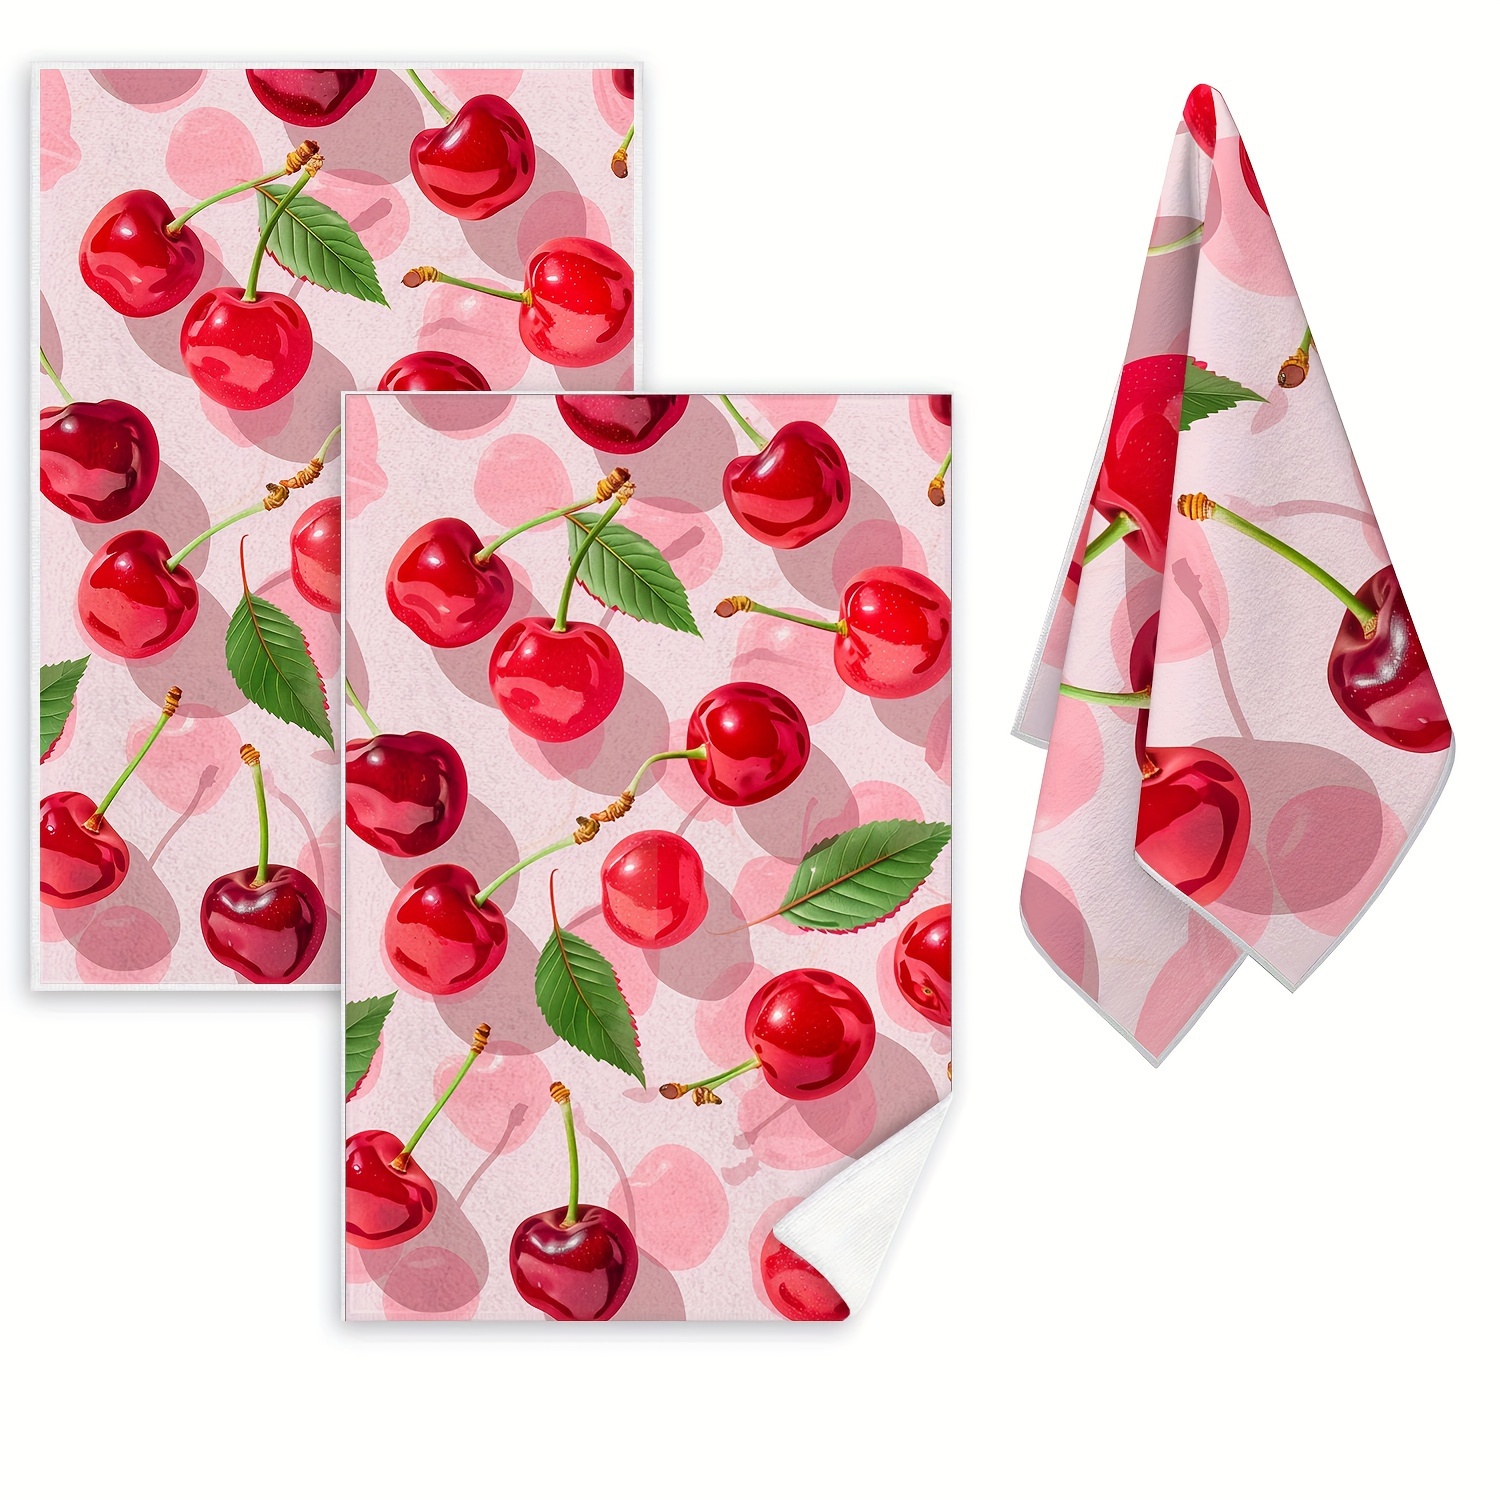 

2-piece Ultra-soft Microfiber Hand Towels - Red Cherry Design, Absorbent & Decorative Kitchen Dish Towels, Perfect For Cooking, Baking, Housewarming Gifts - Machine Washable